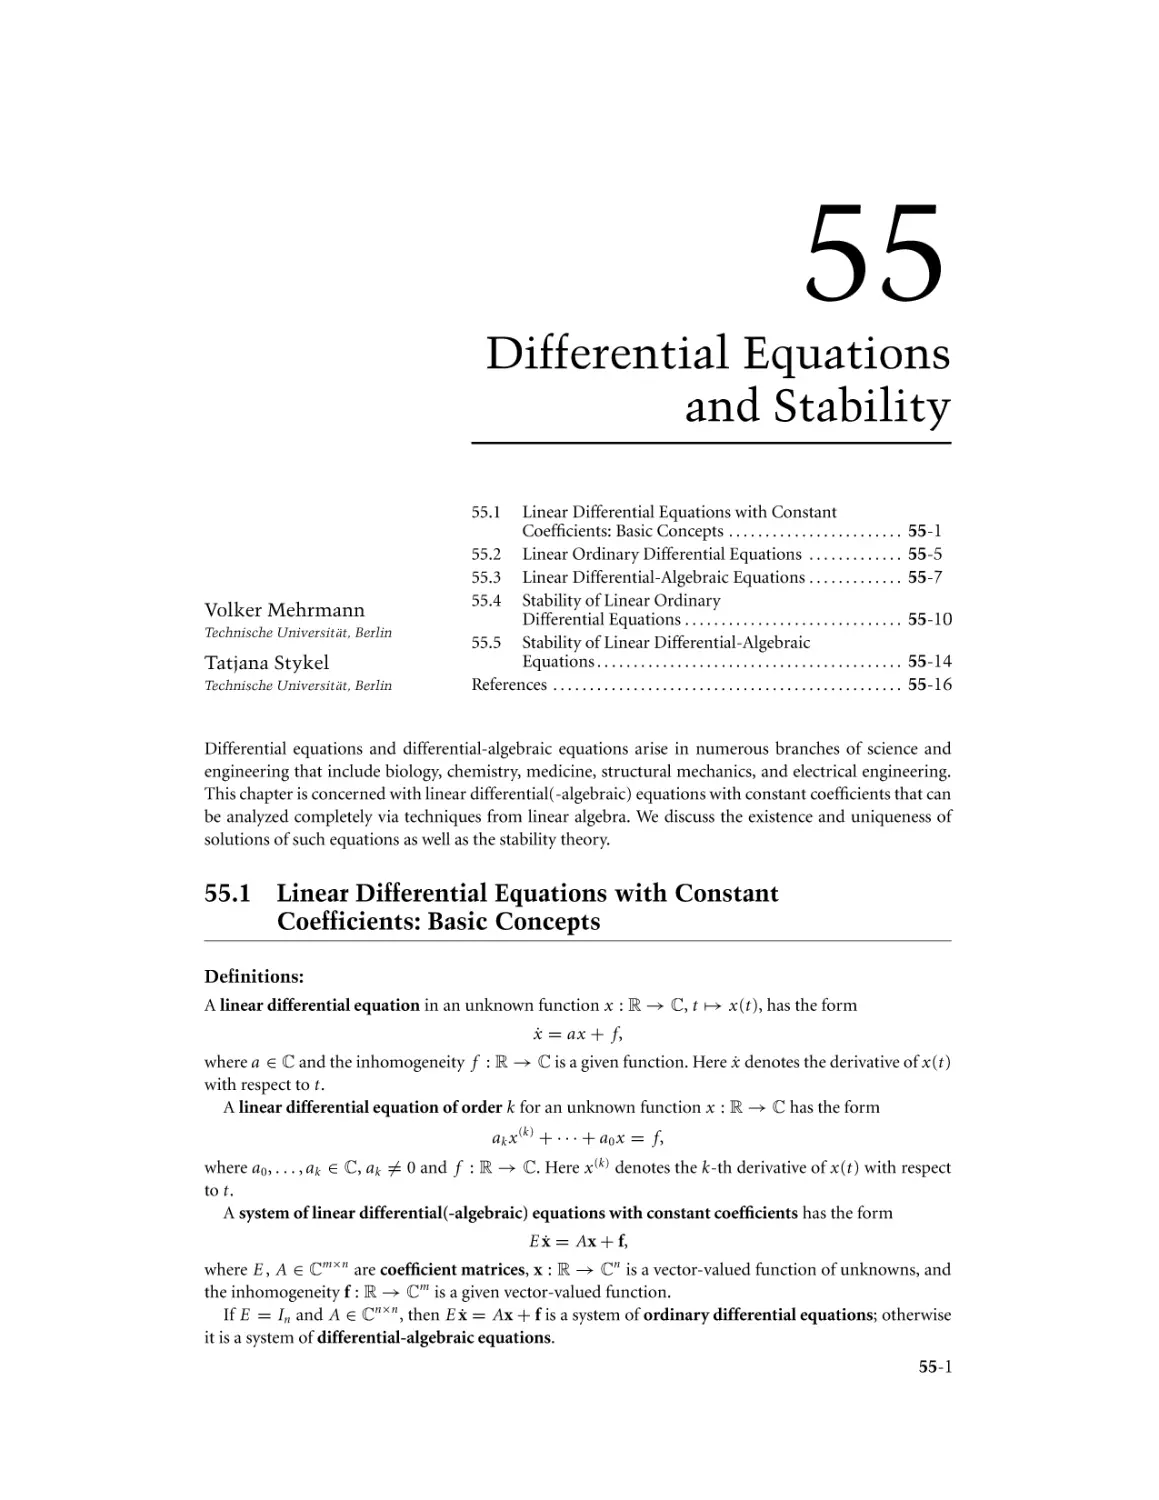 Chapter 55. Differential Equations and Stability